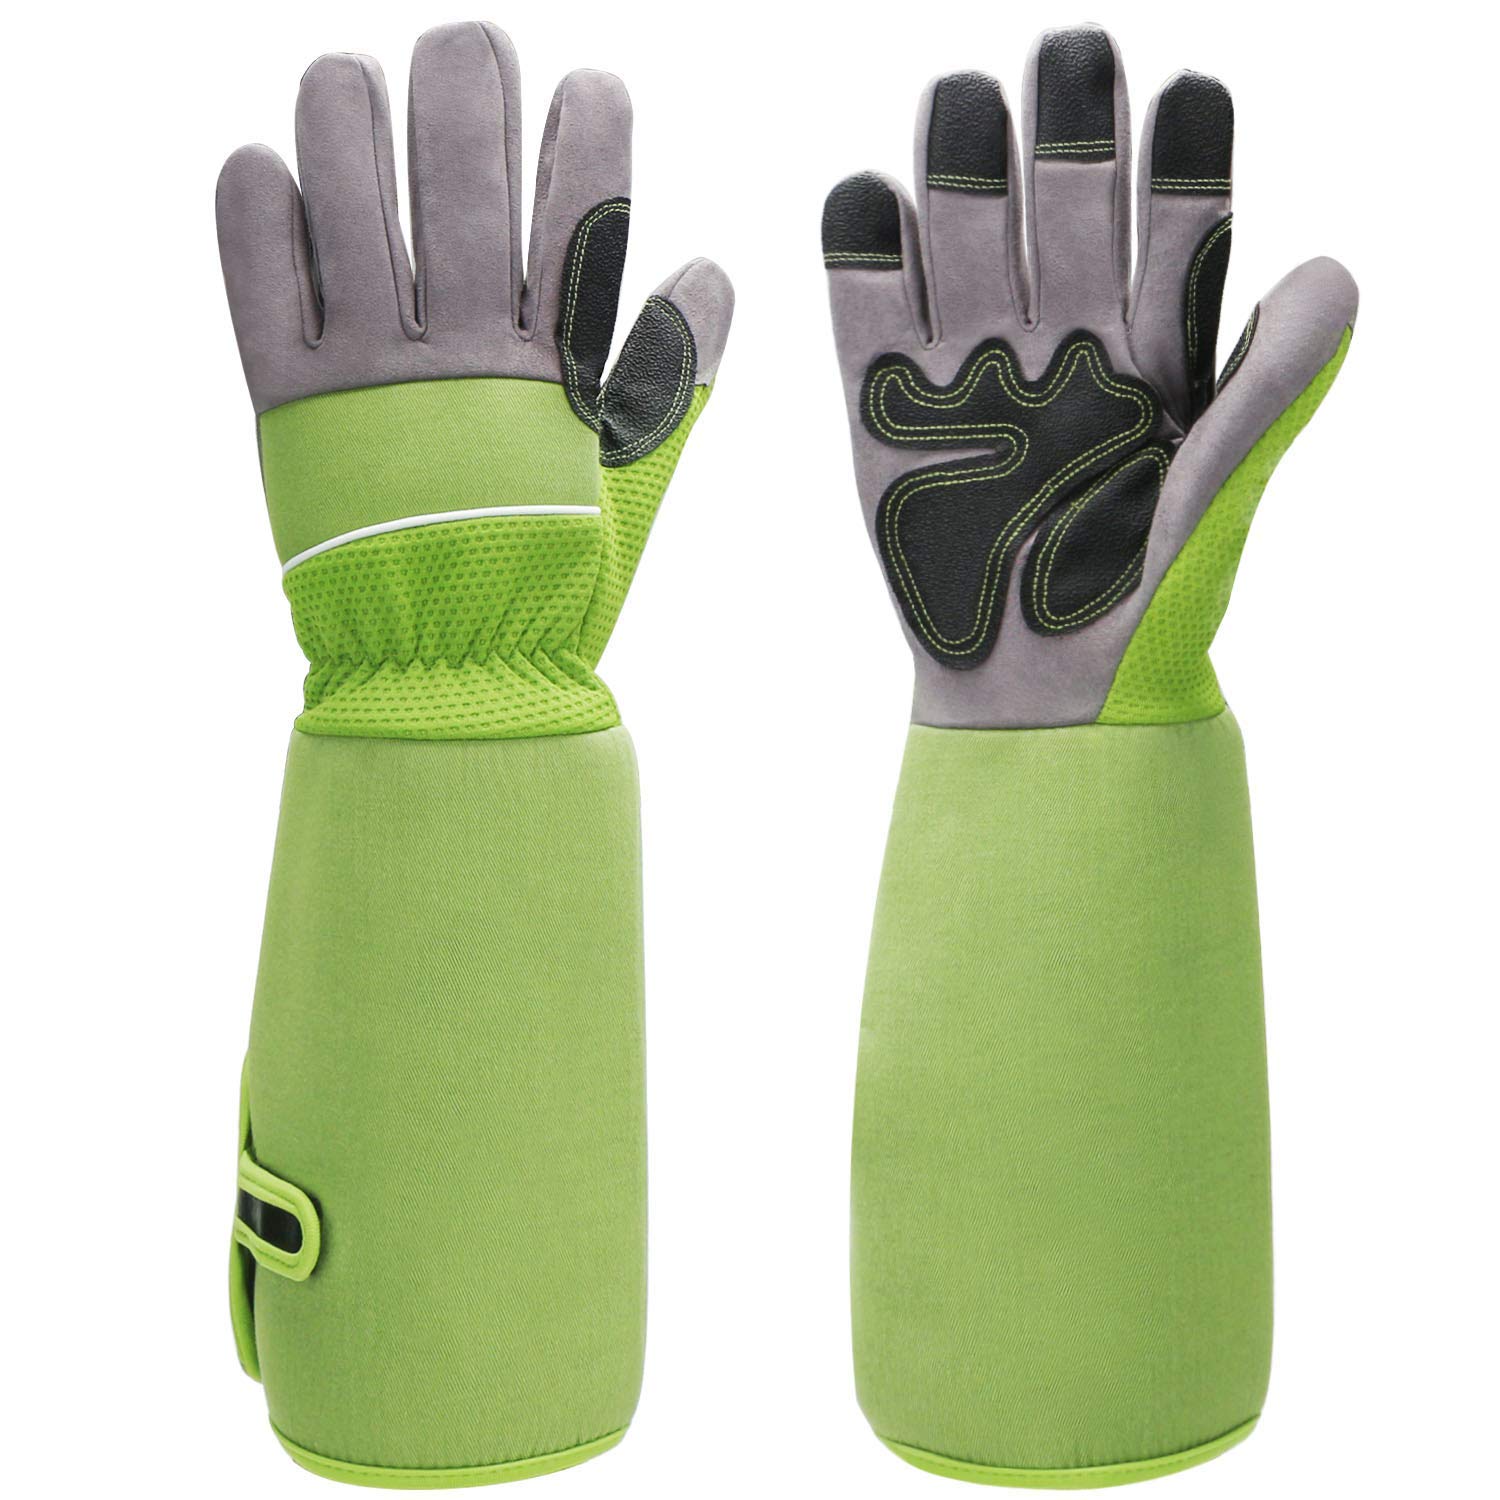 Professional Rose Pruning Gloves Enpoint Long Leather Gardening